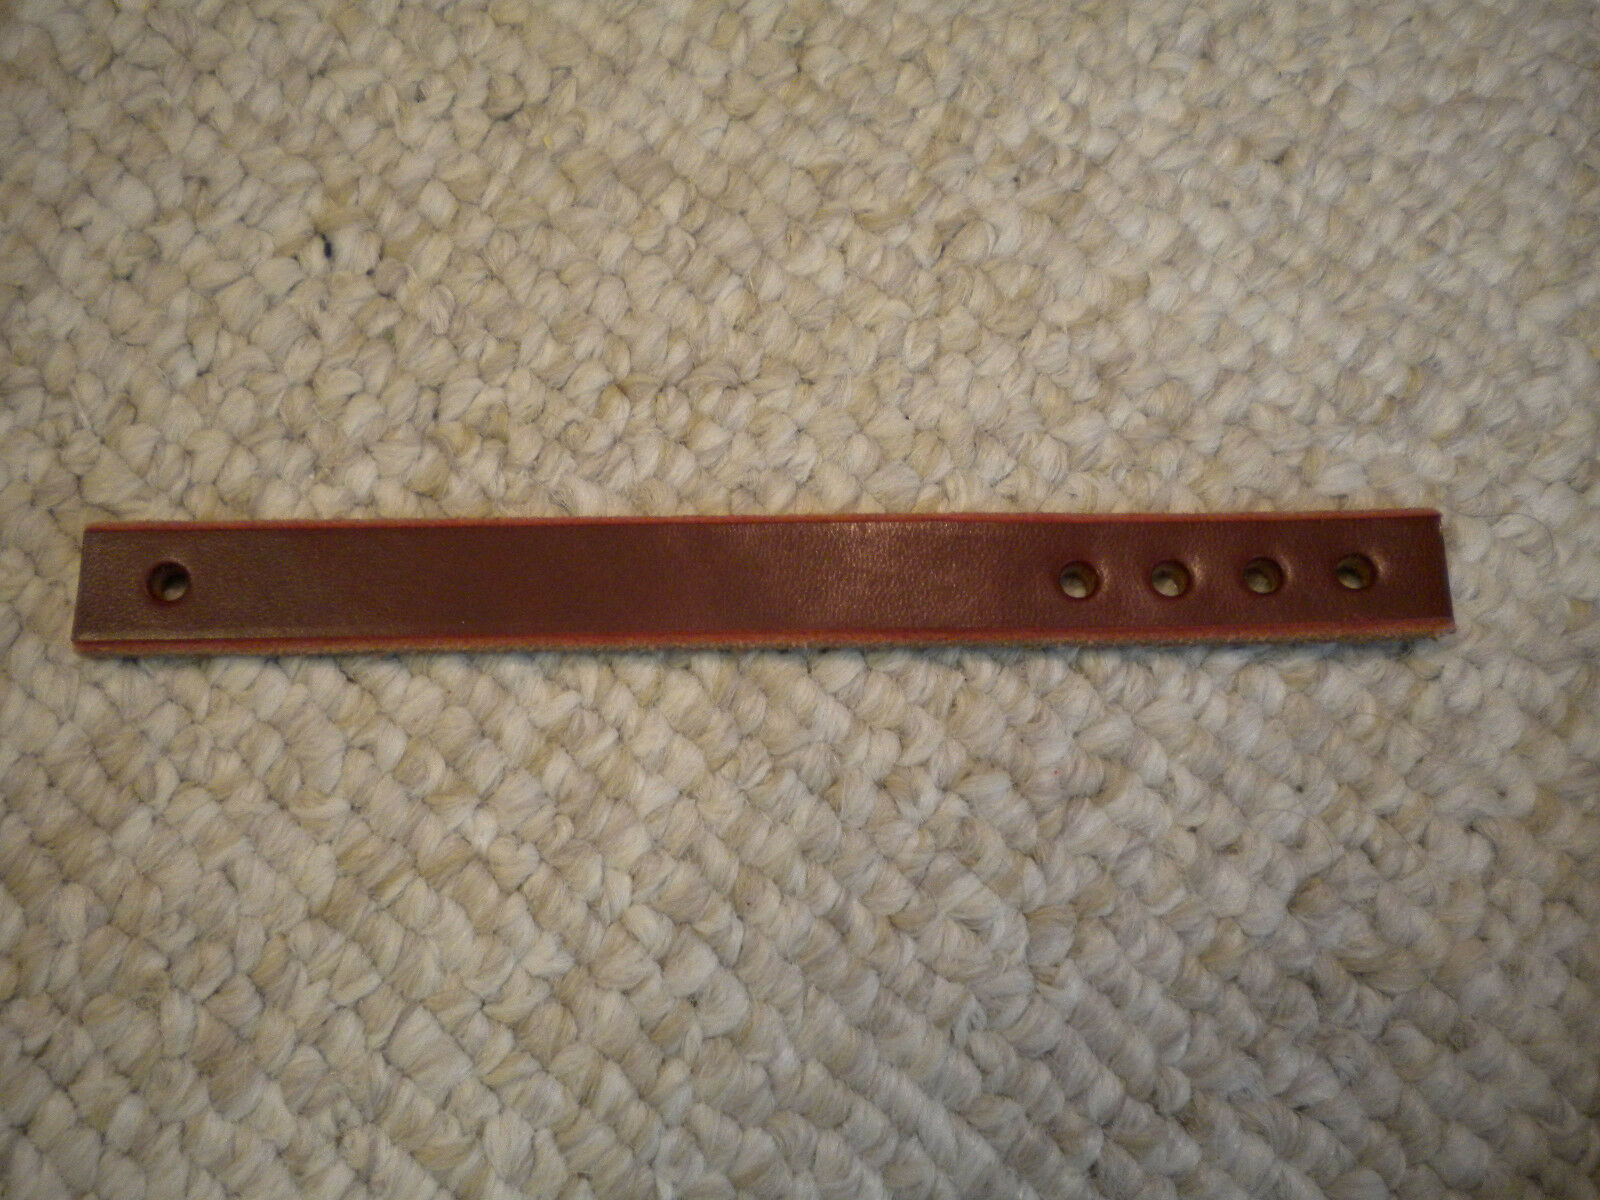 Replacement Leather Strap For Slingerland Tempo King Bass Drum Pedals!